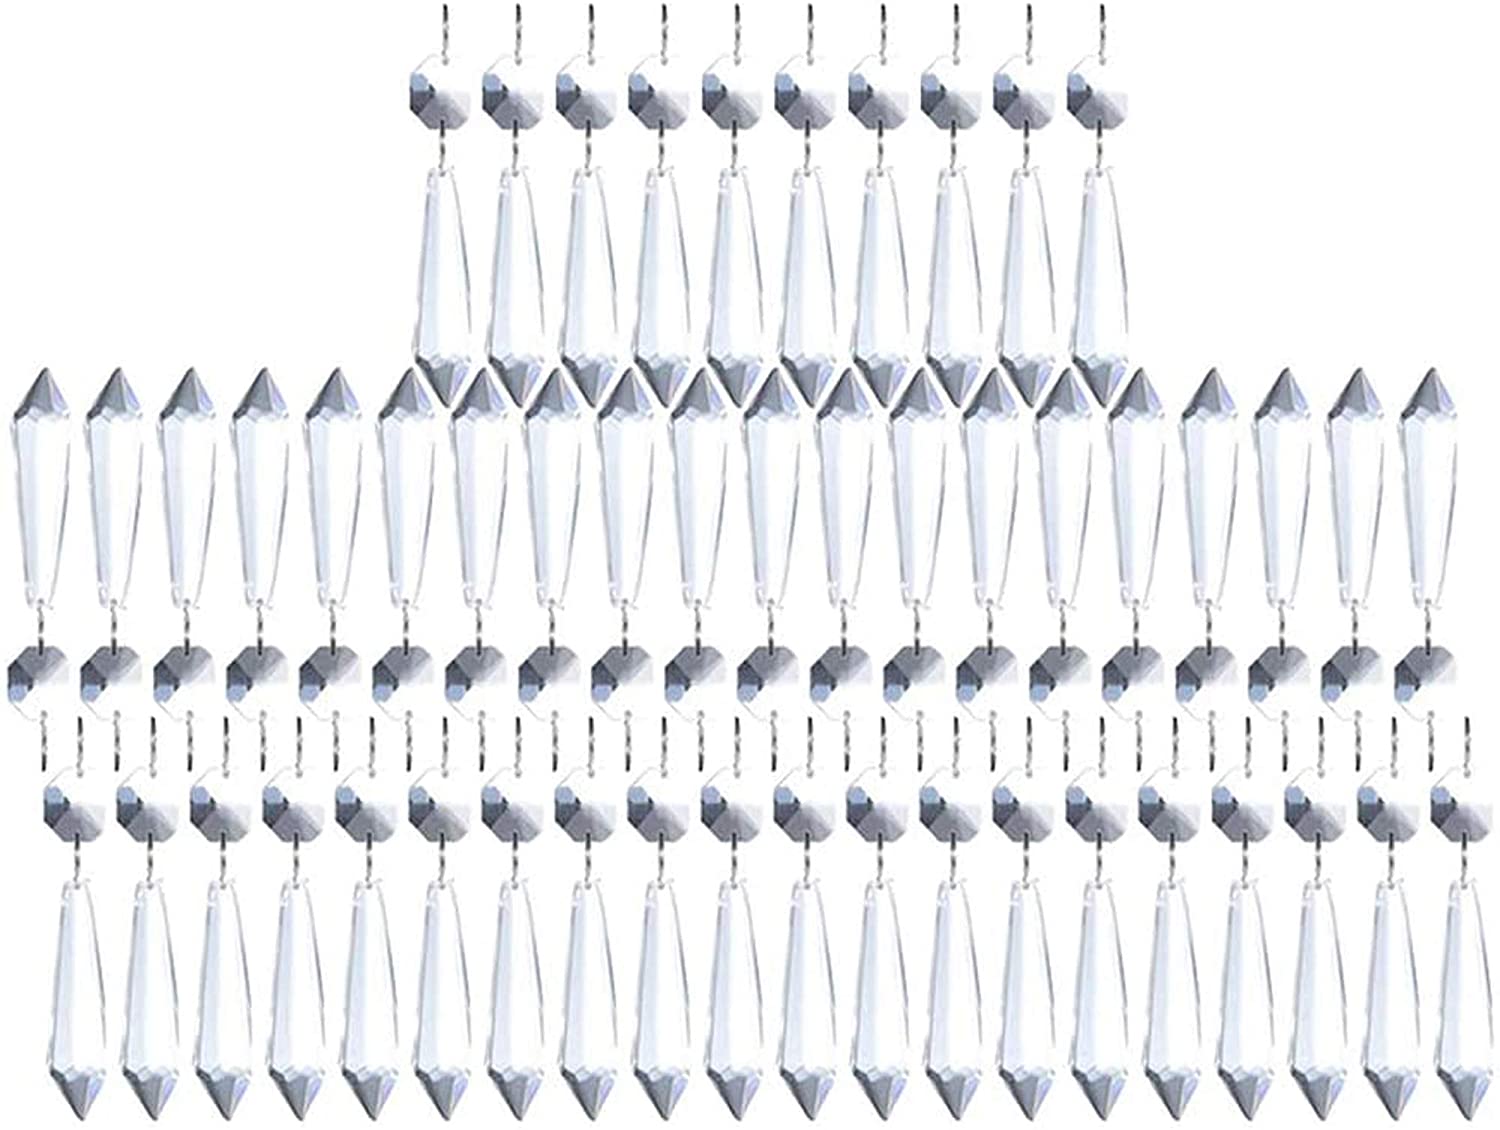 H&D 50pcs Clear Chandelier Crystal Icicle Prisms Beads (38mm&Silver Circle Clips) - image 1 of 3